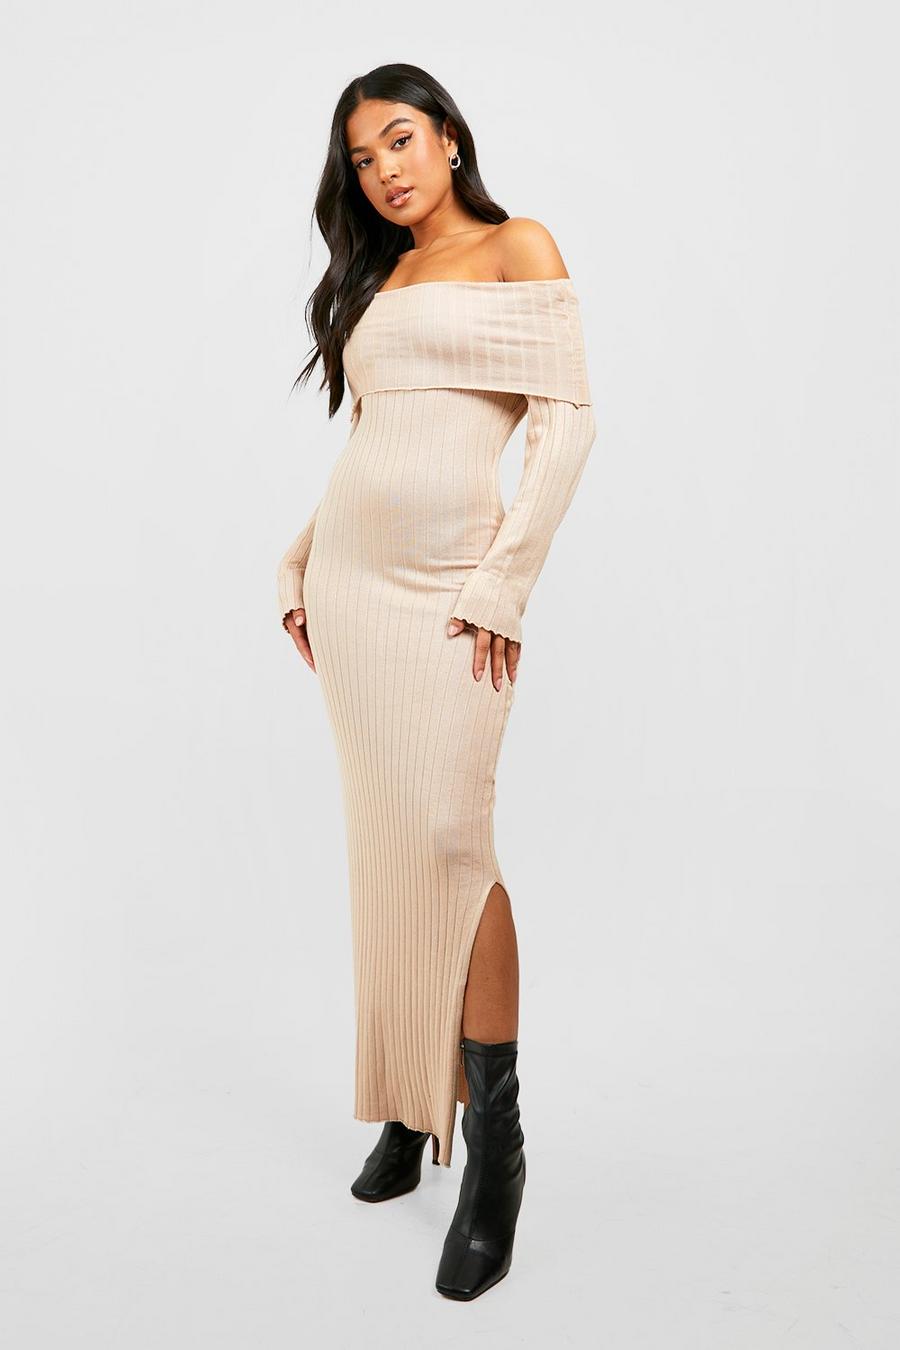 Stone Petite Oversized Off The Shoulder Neckline Knitted Maxi Dress